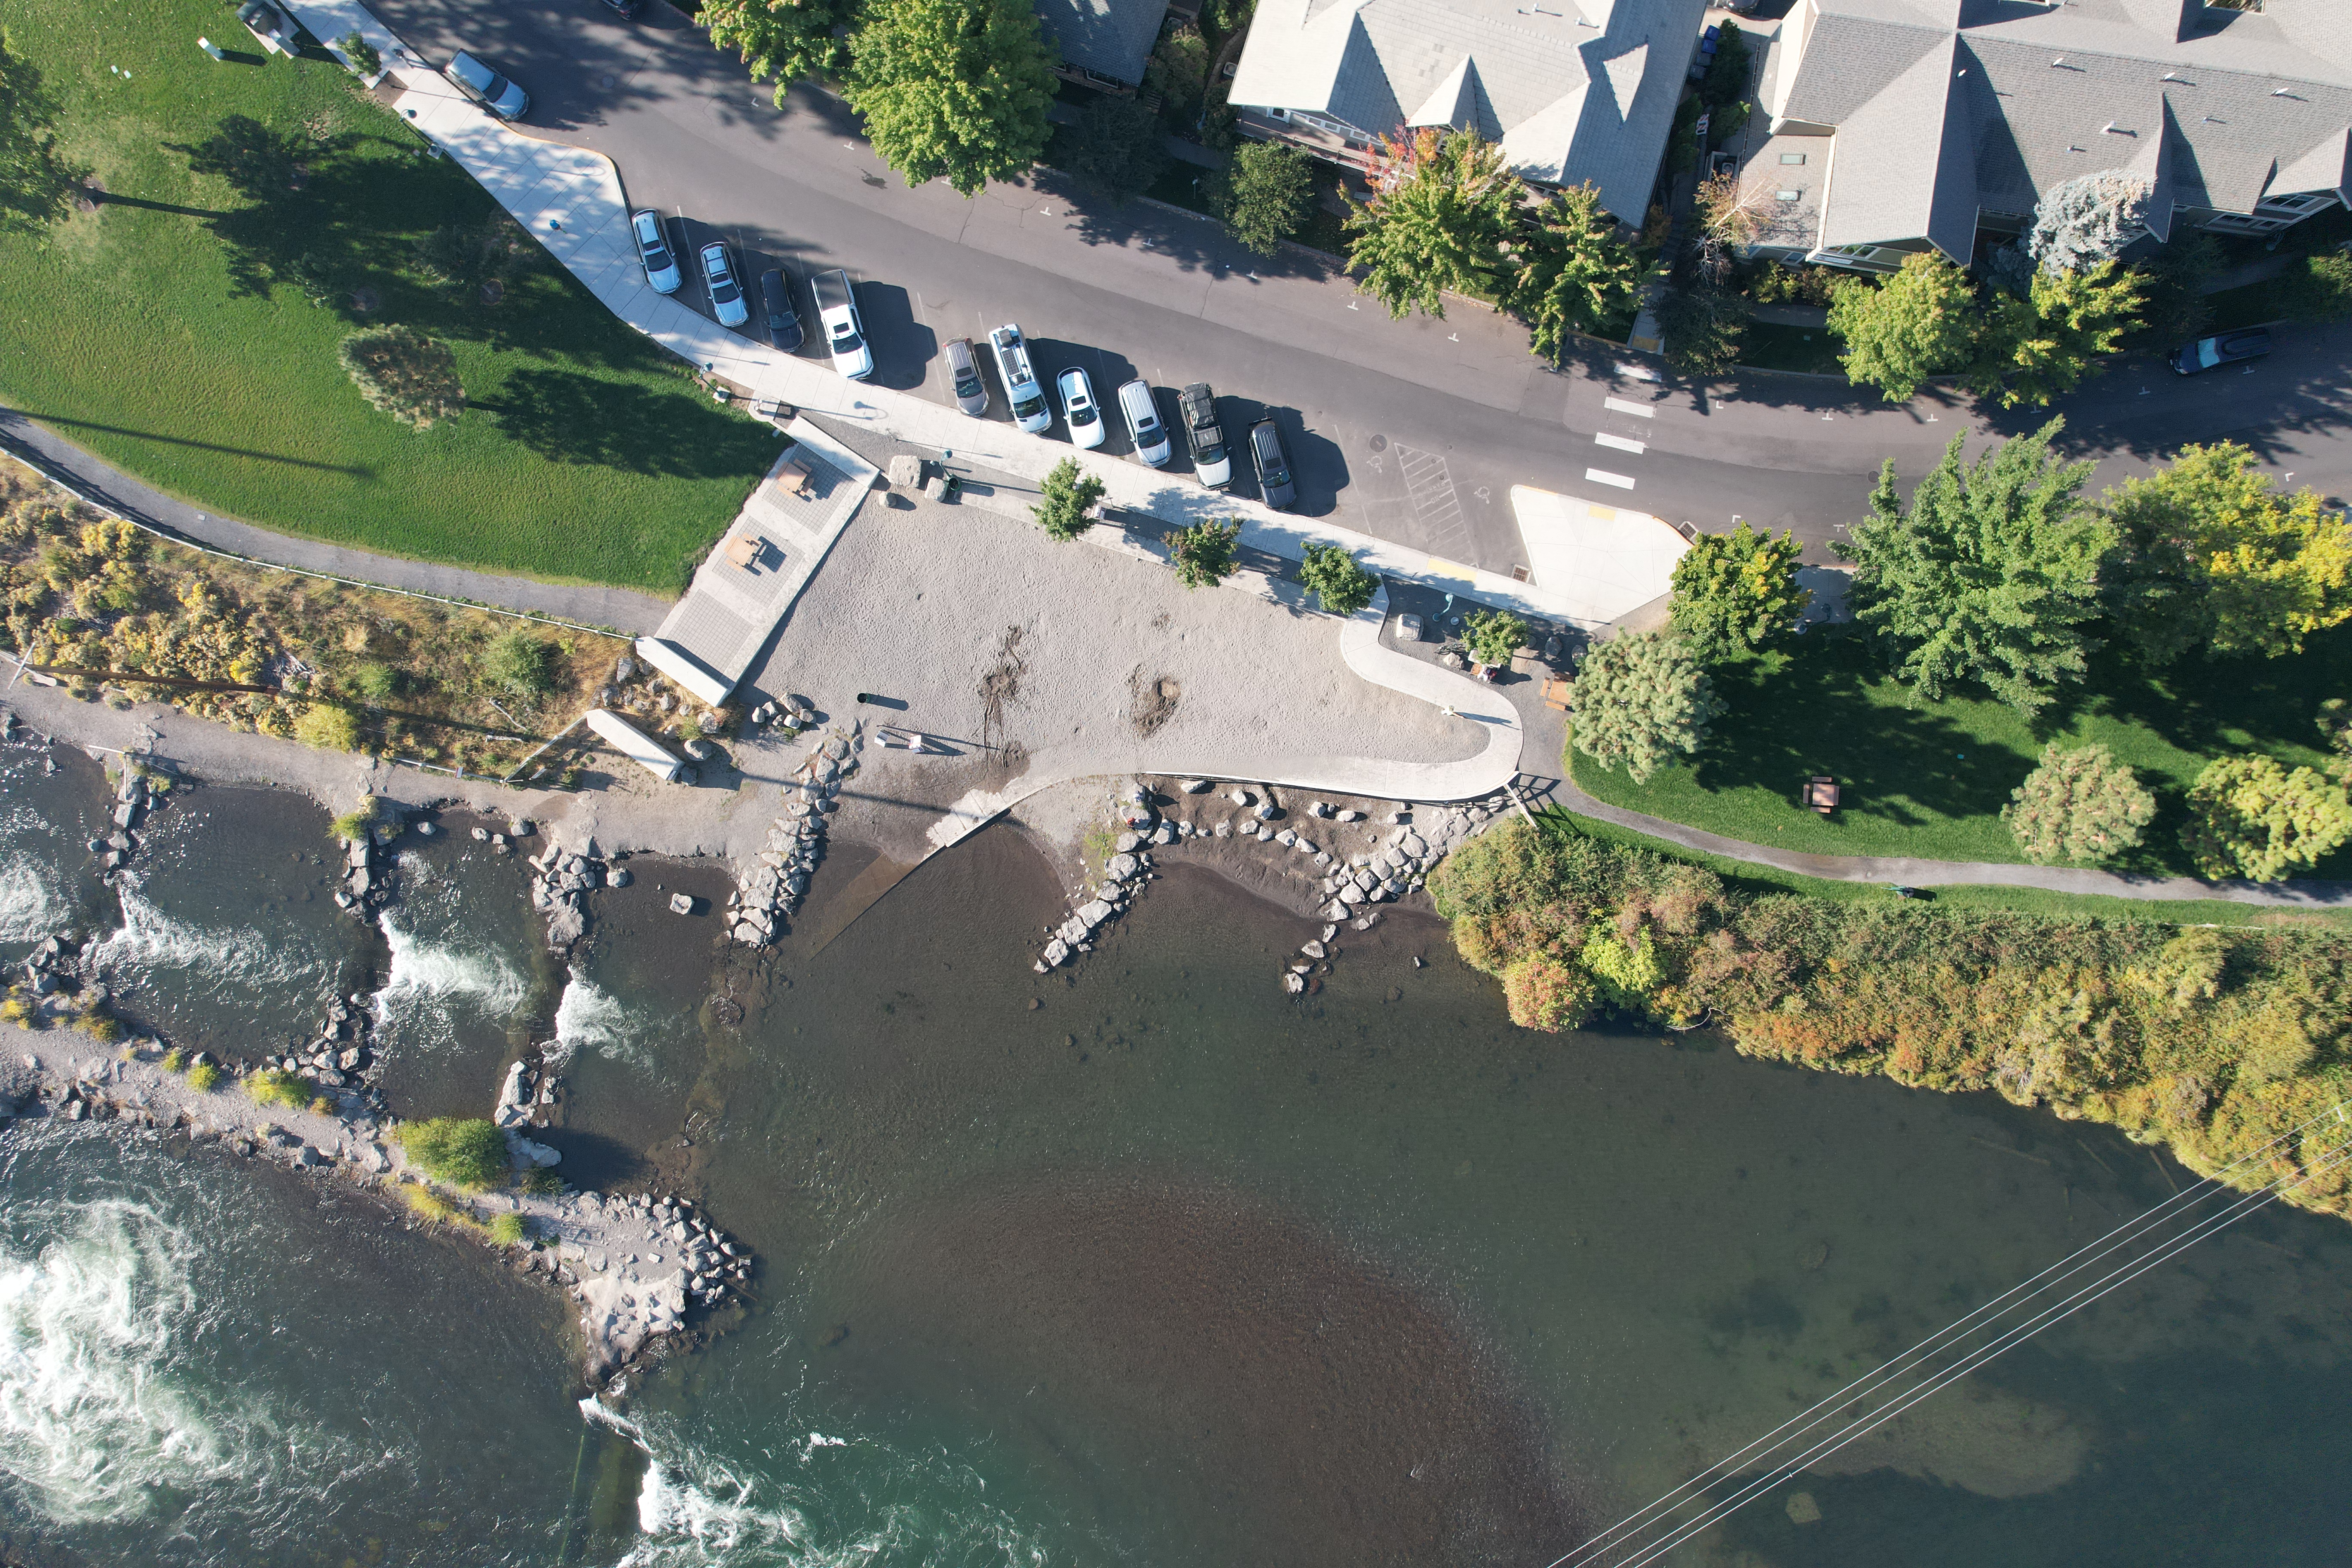 An aerial view of McKay Park beach and the deschutes river